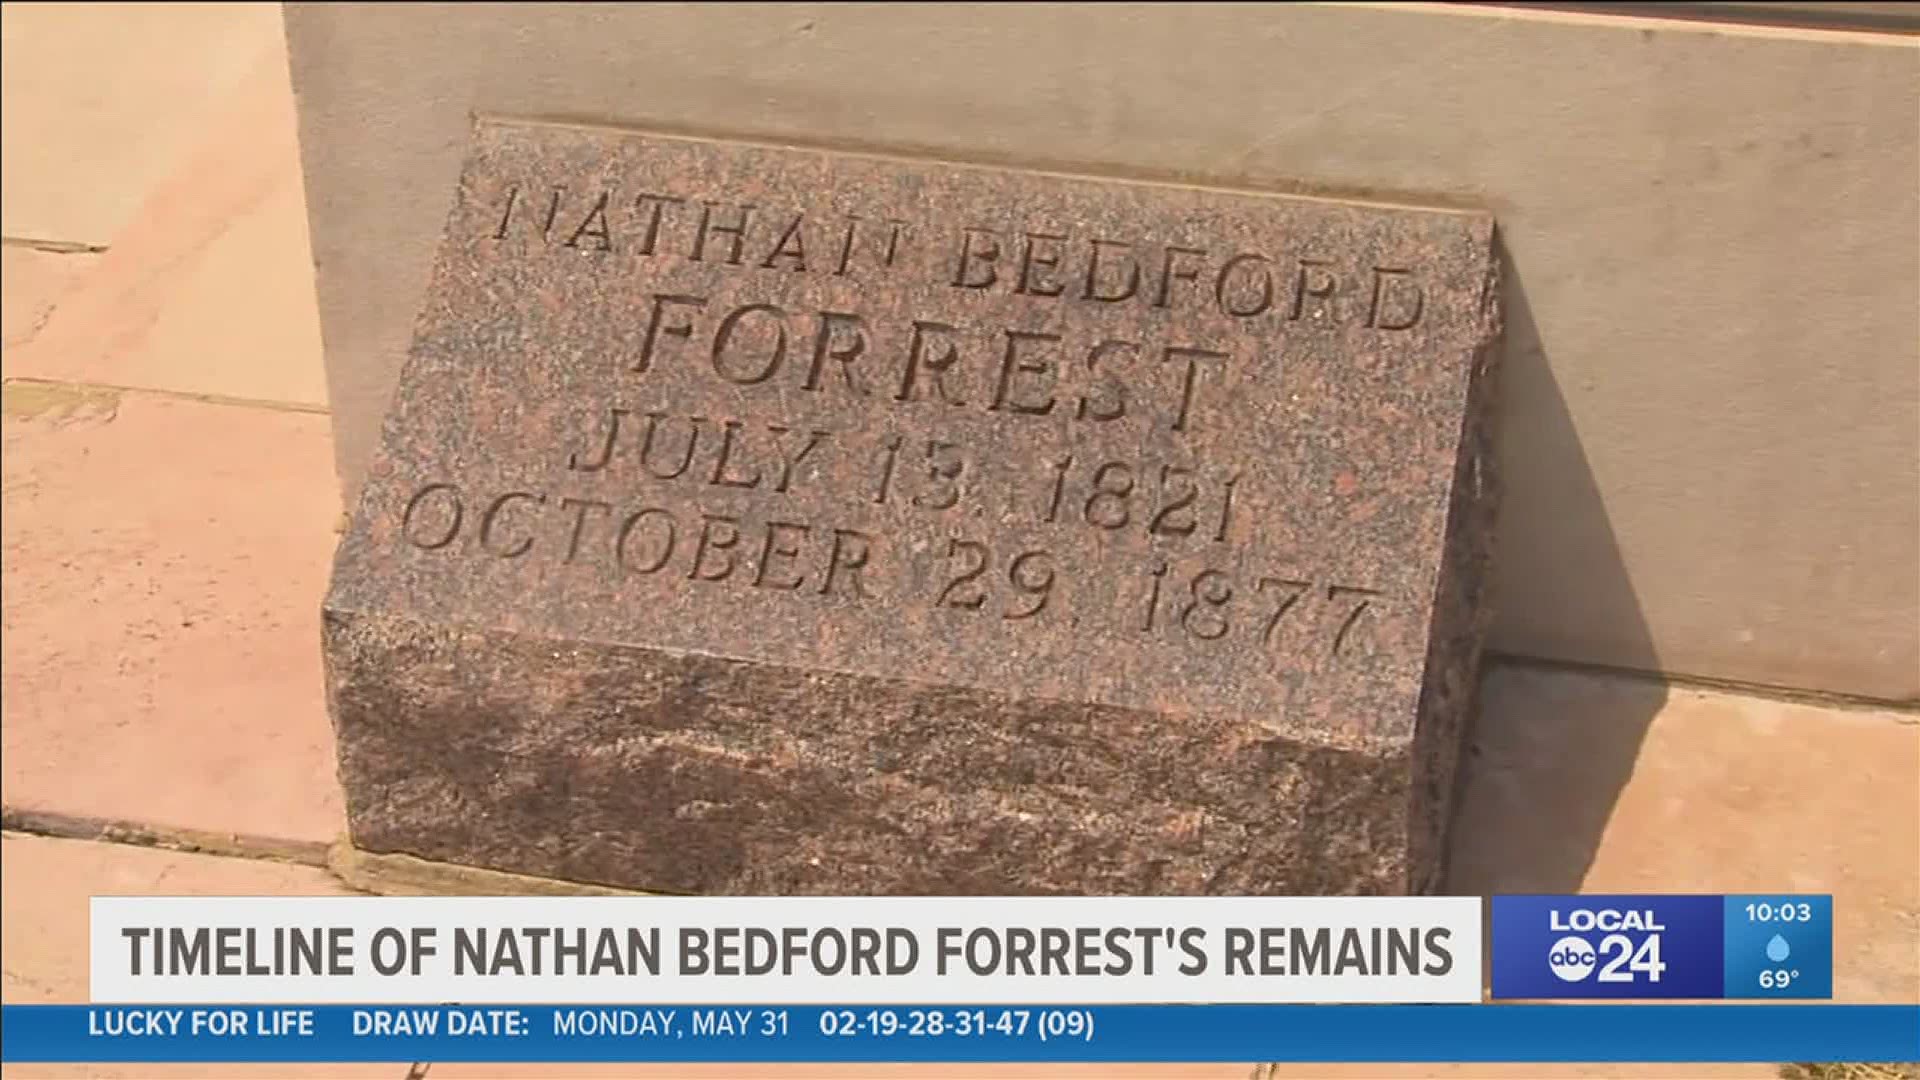 A history professor said the removal of Nathan Bedford Forrest's remains was brought on by a movement that questioned whether Confederate monuments ought to remain.